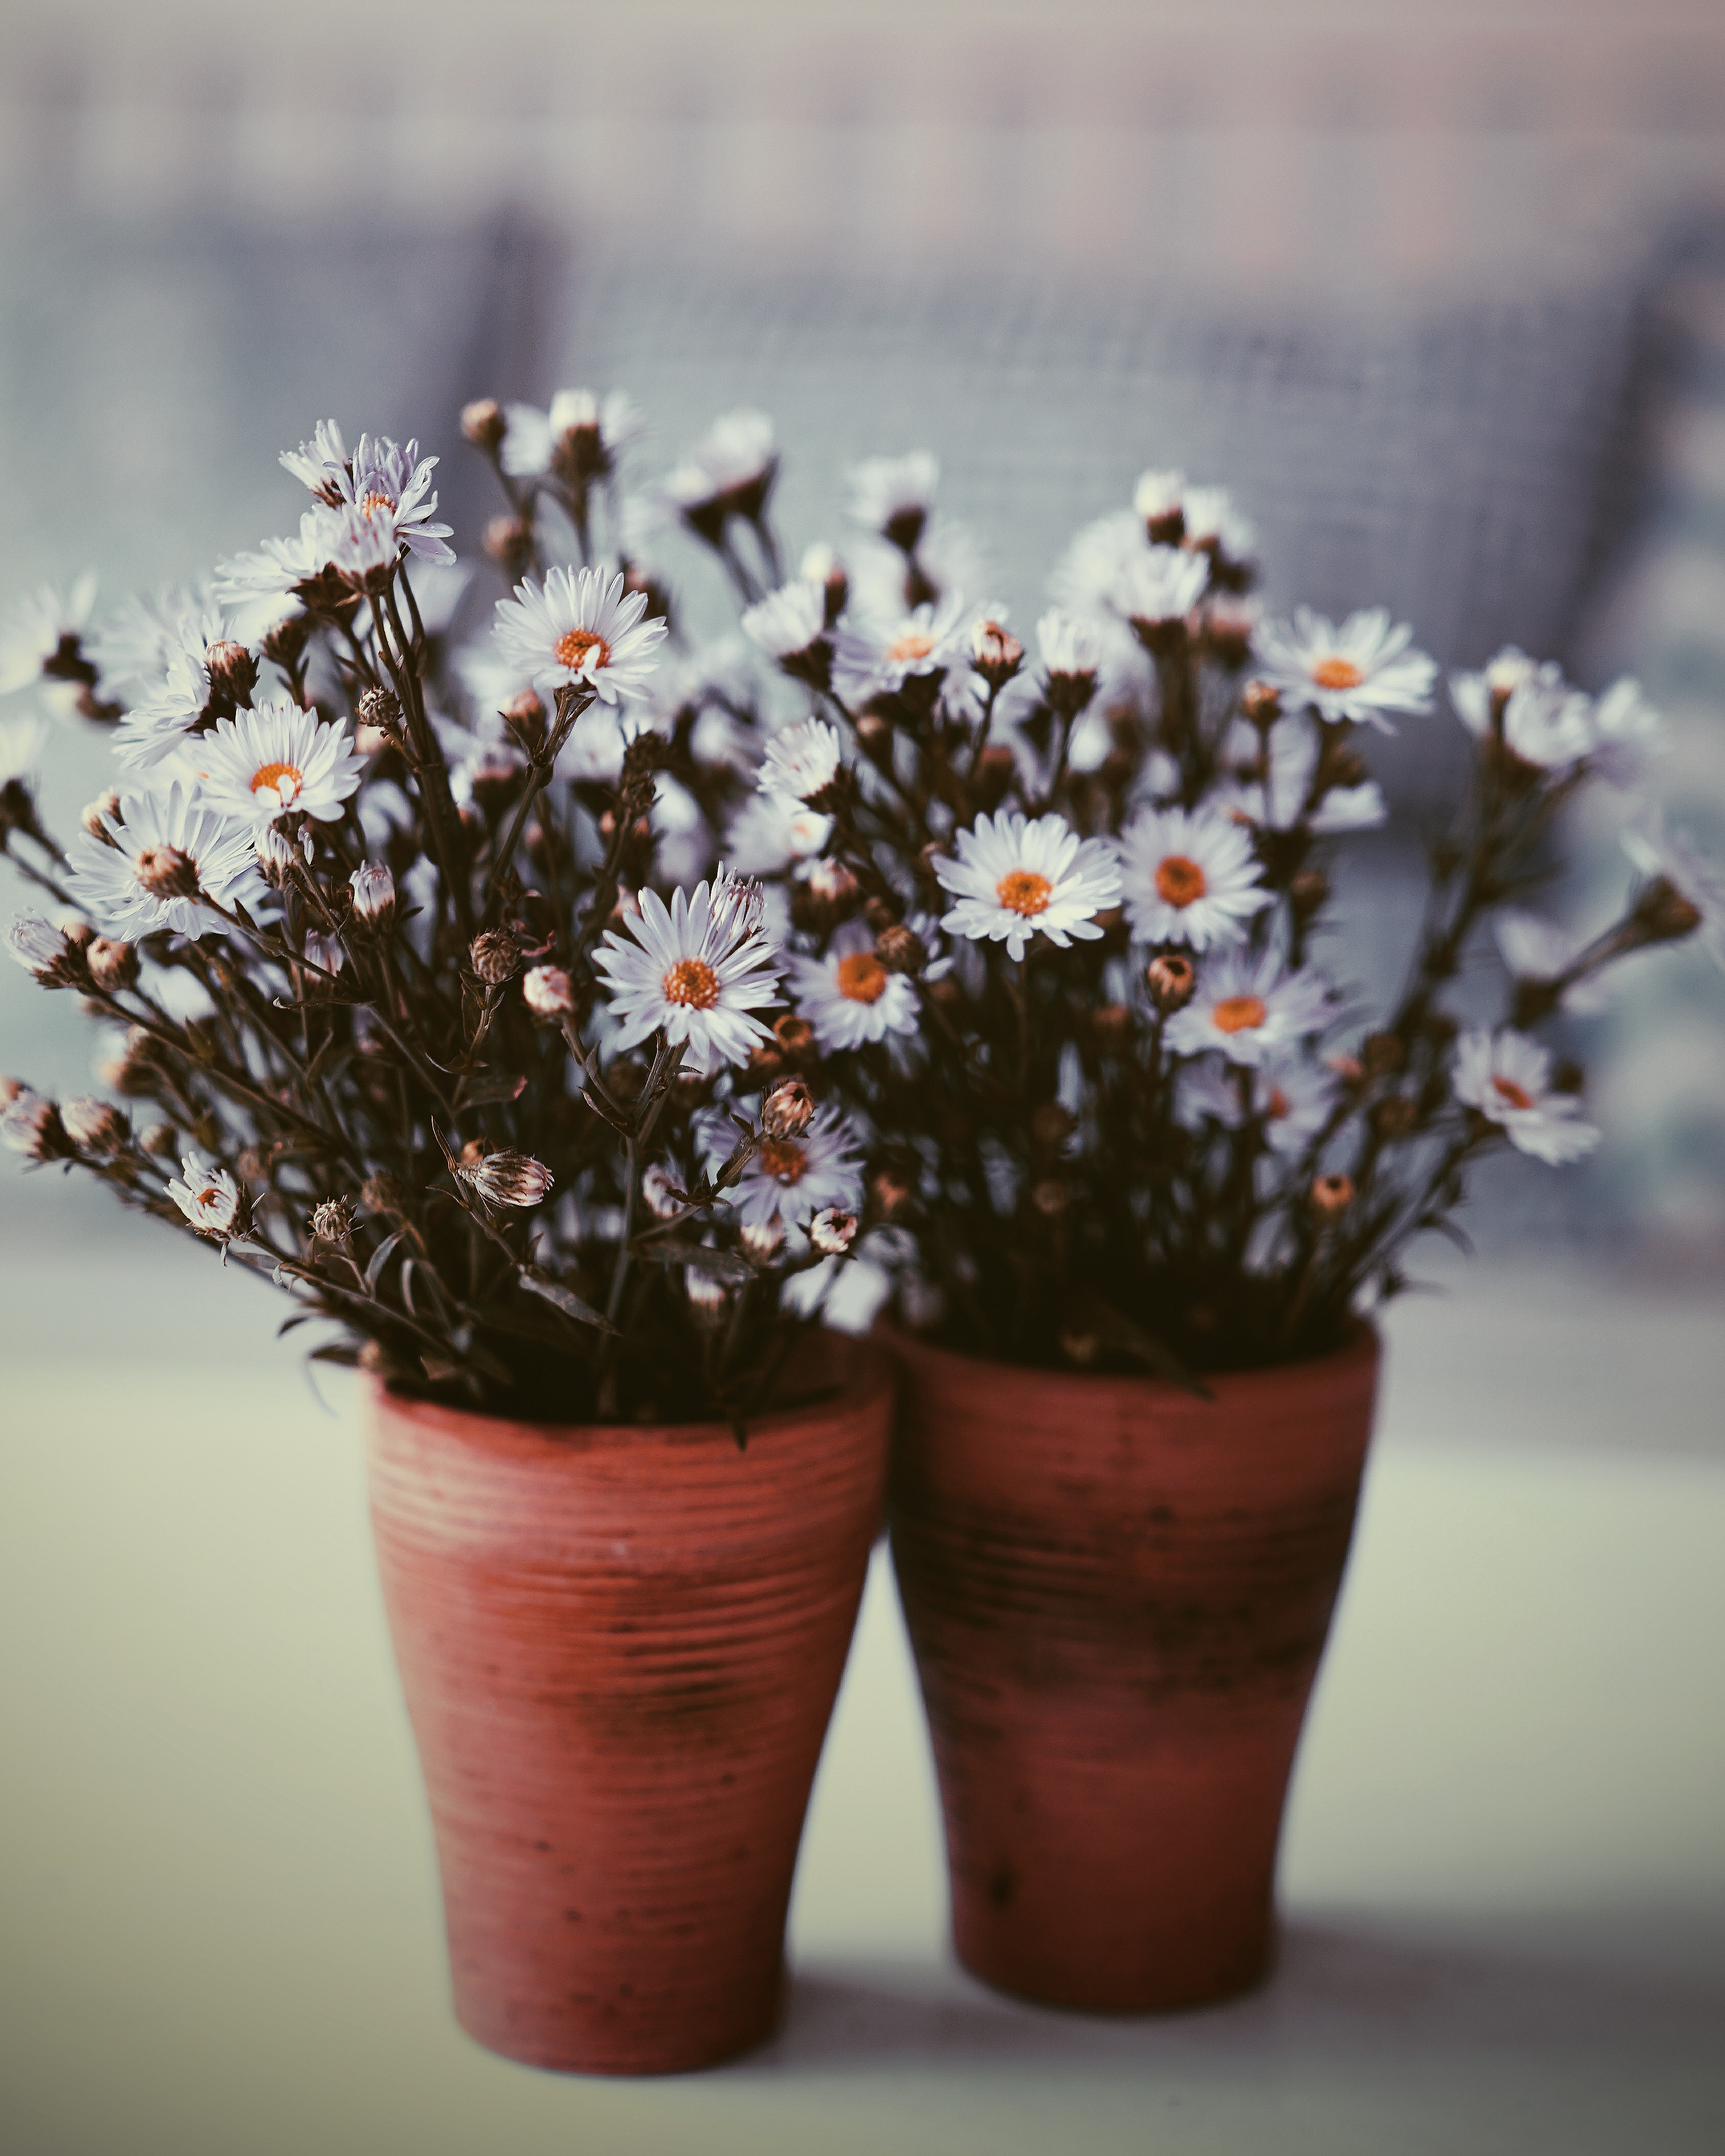 123066 download wallpaper flowers, bouquets, blur, smooth, vase screensavers and pictures for free